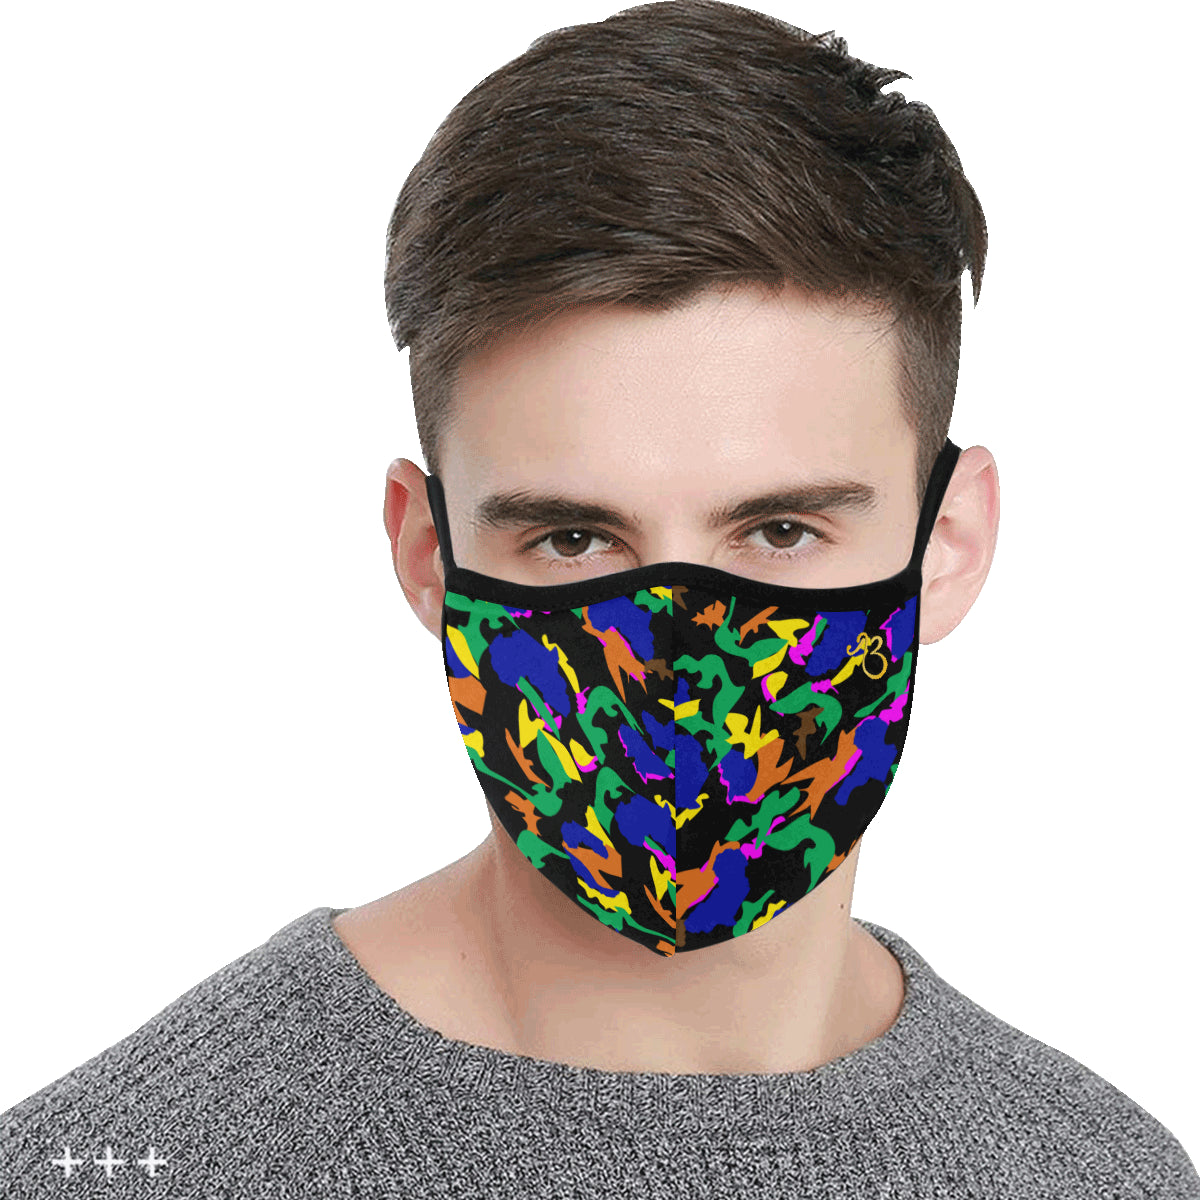 AfriBix Camo Print Cotton Fabric Face Mask with filter slot (30 Filters Included) - Non-medical use